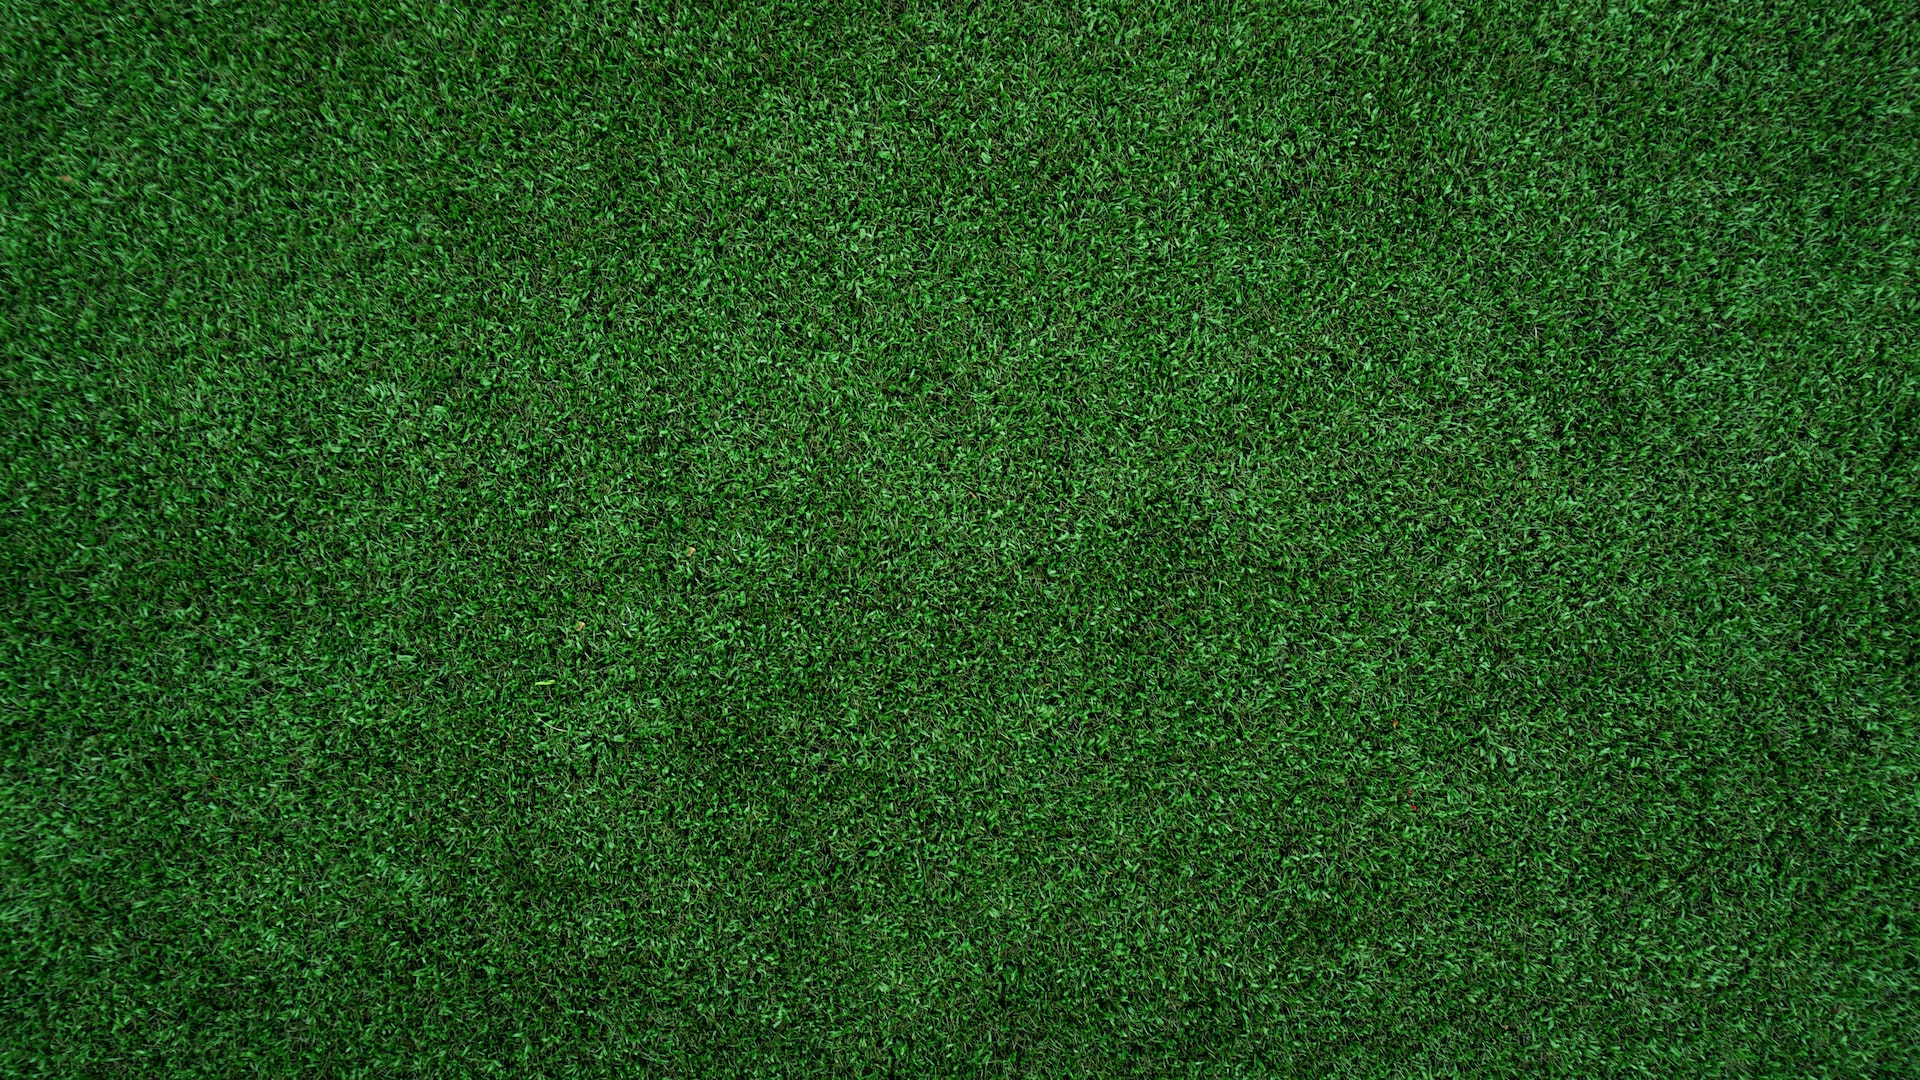 full image of rich green turf